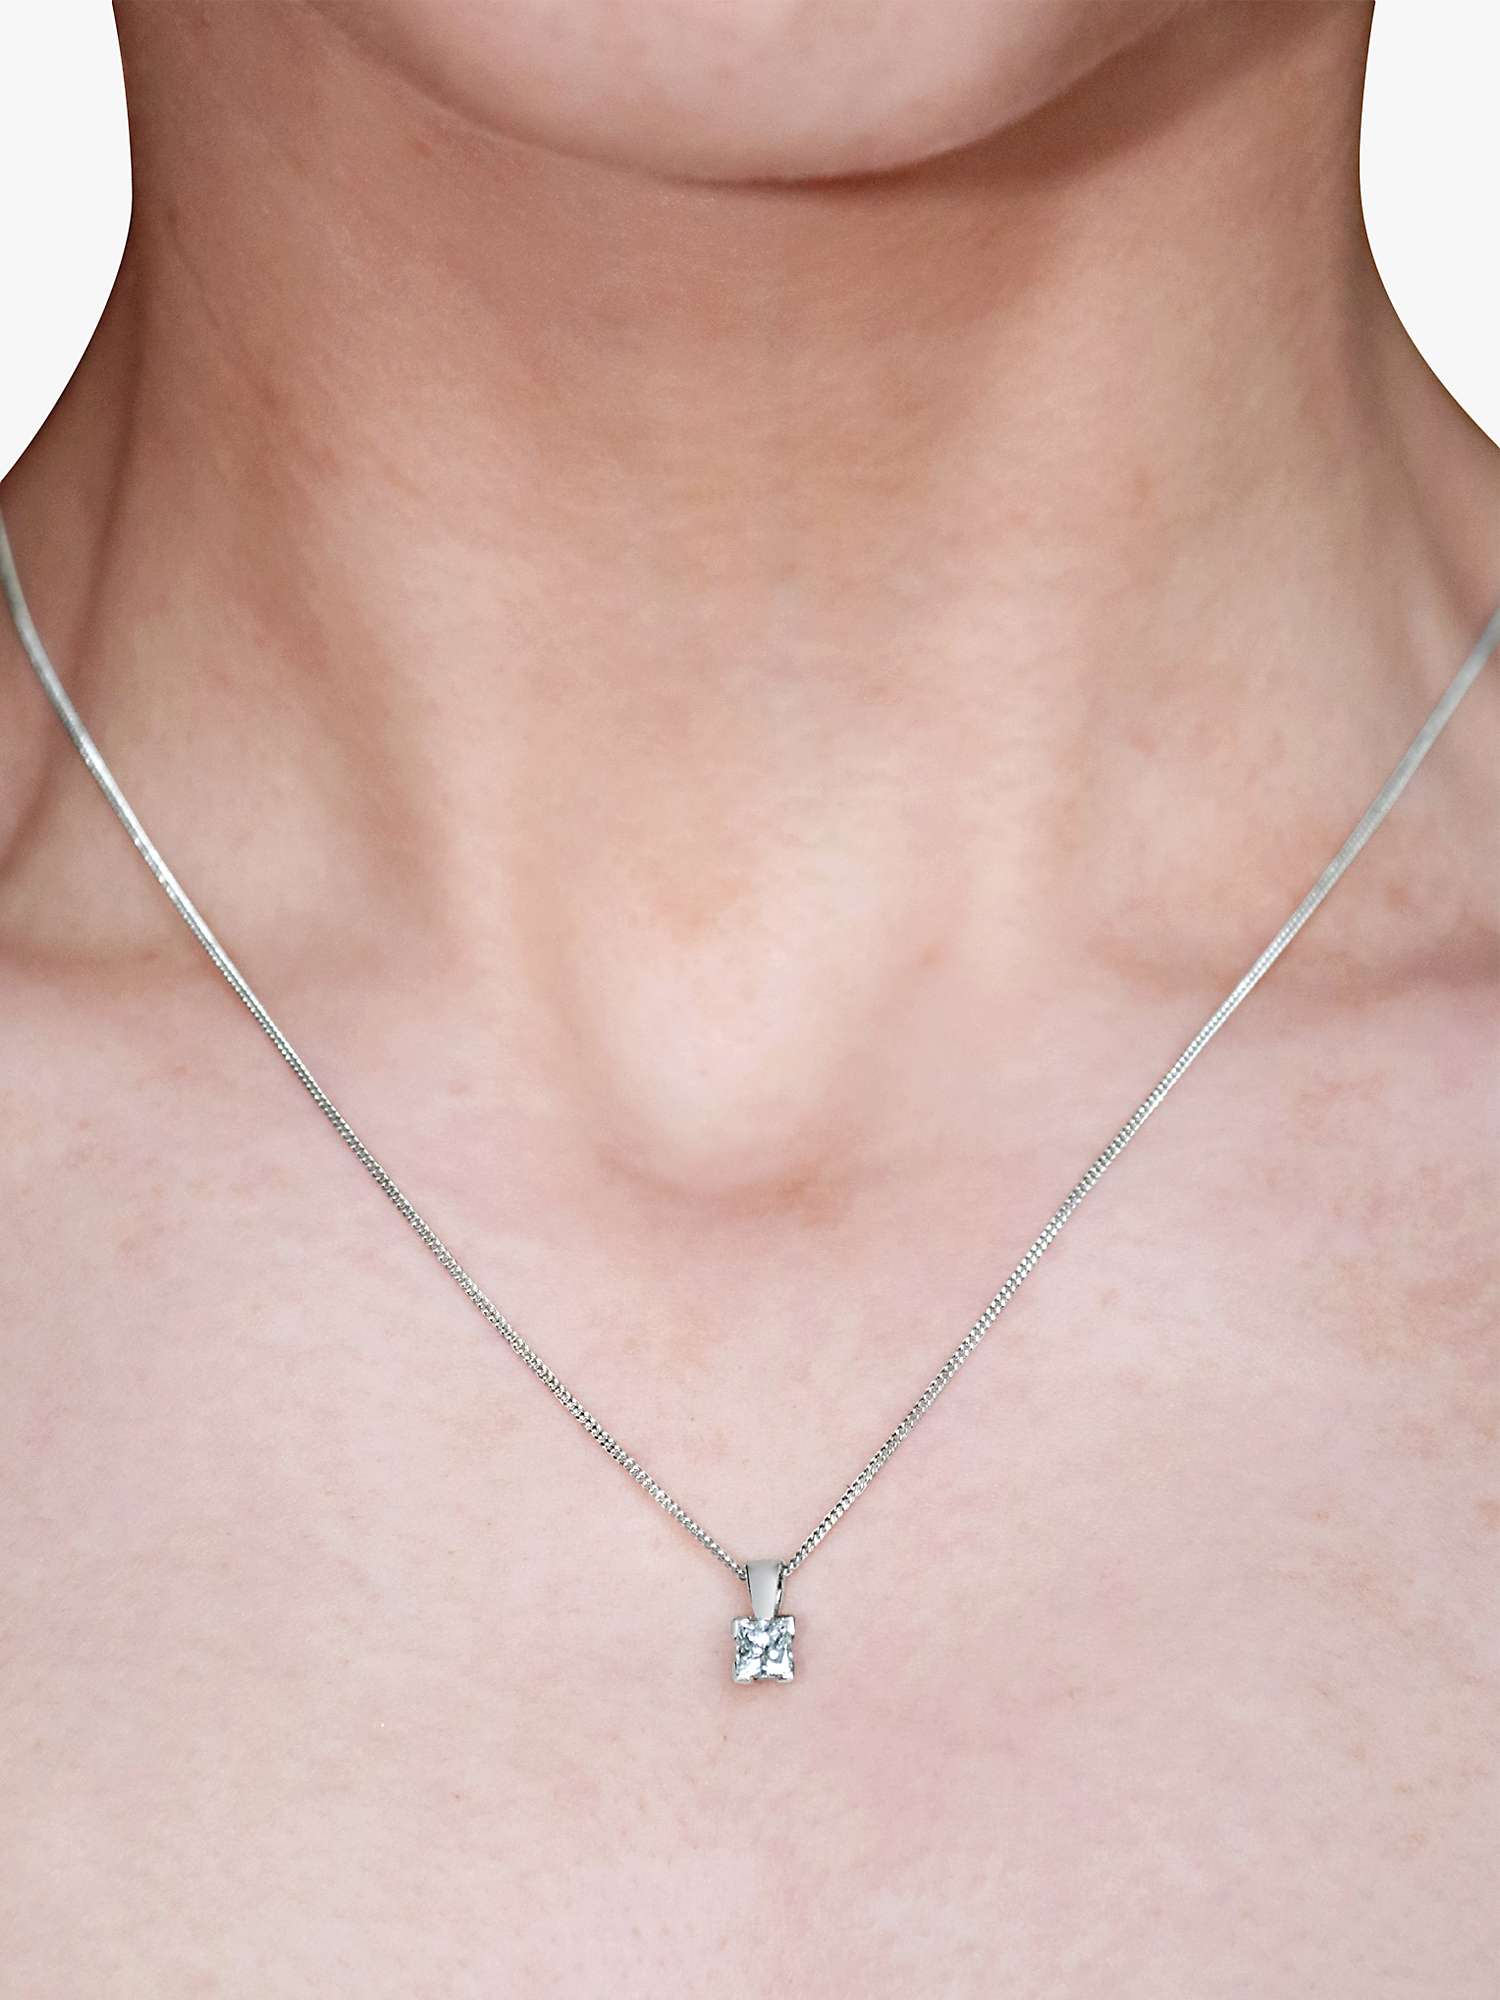 Buy Milton & Humble Jewellery Second Hand White Gold Solitaire Diamond Pendant Necklace Online at johnlewis.com